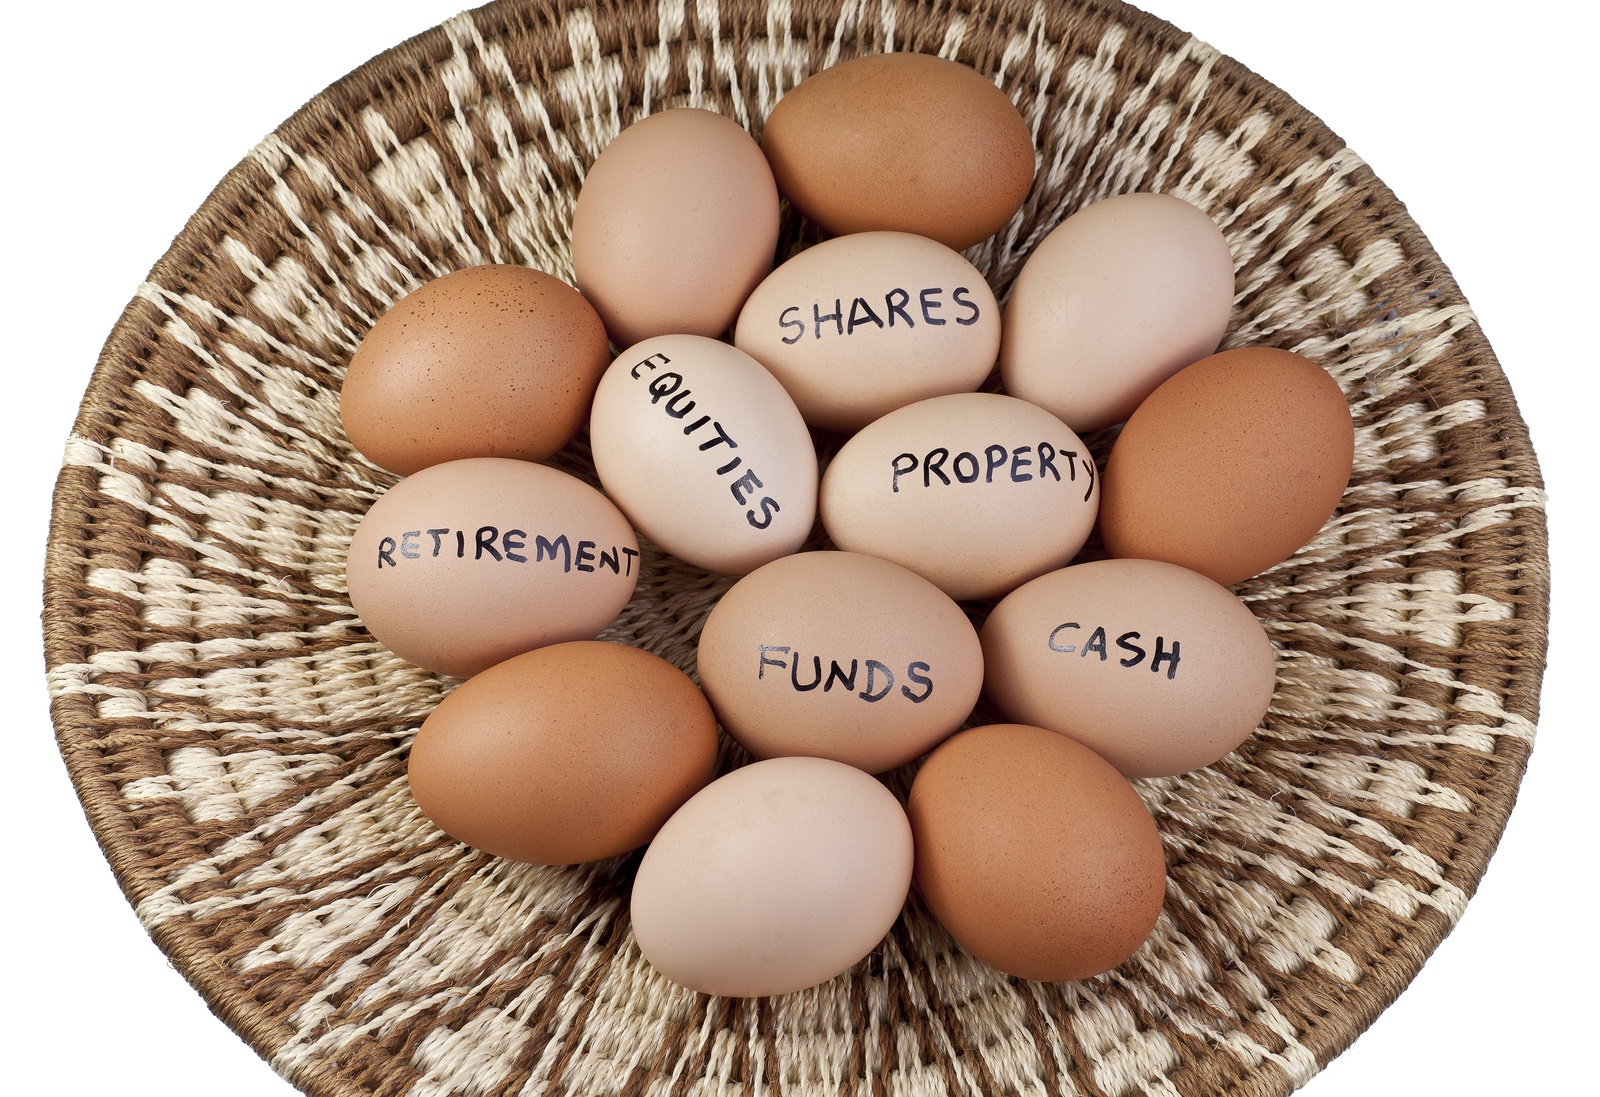 Concept of investment with eggs in the same basket.